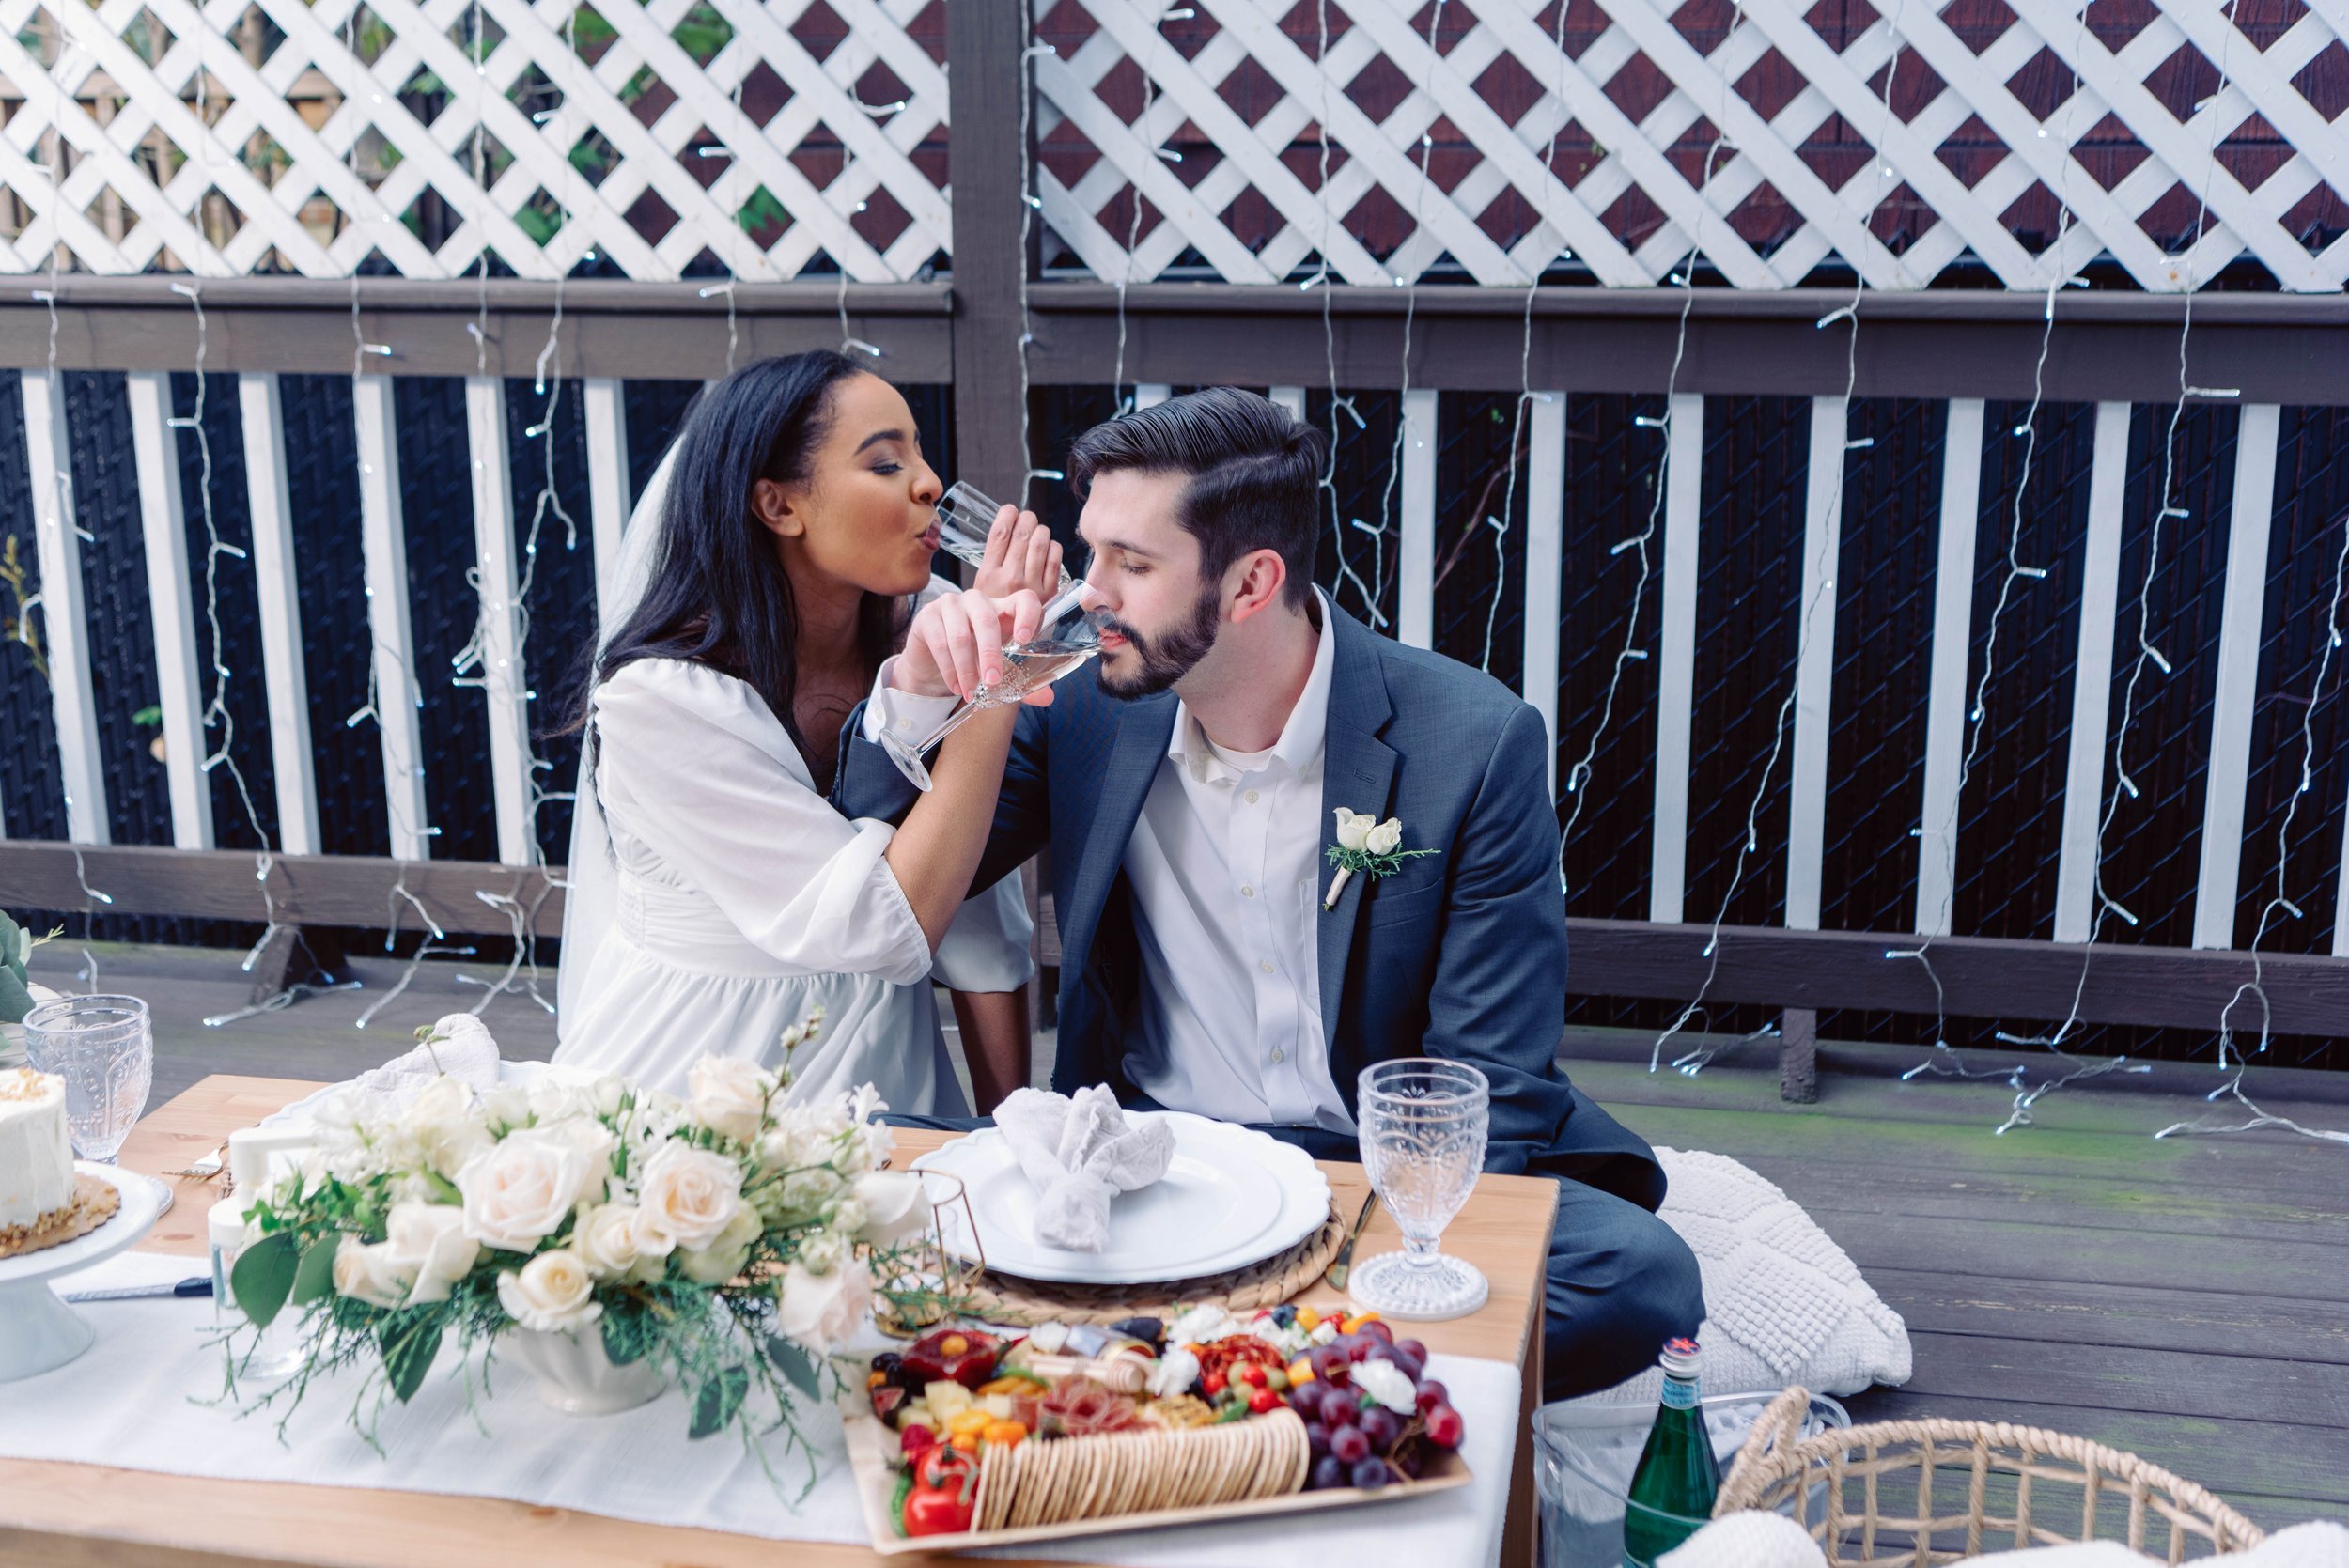 Fun champagne spray and toast during this couple's private picnic on their elopement day. Luxury picnics can be totally customized to fit your elopement day vibe. Let's chat about designing your day!